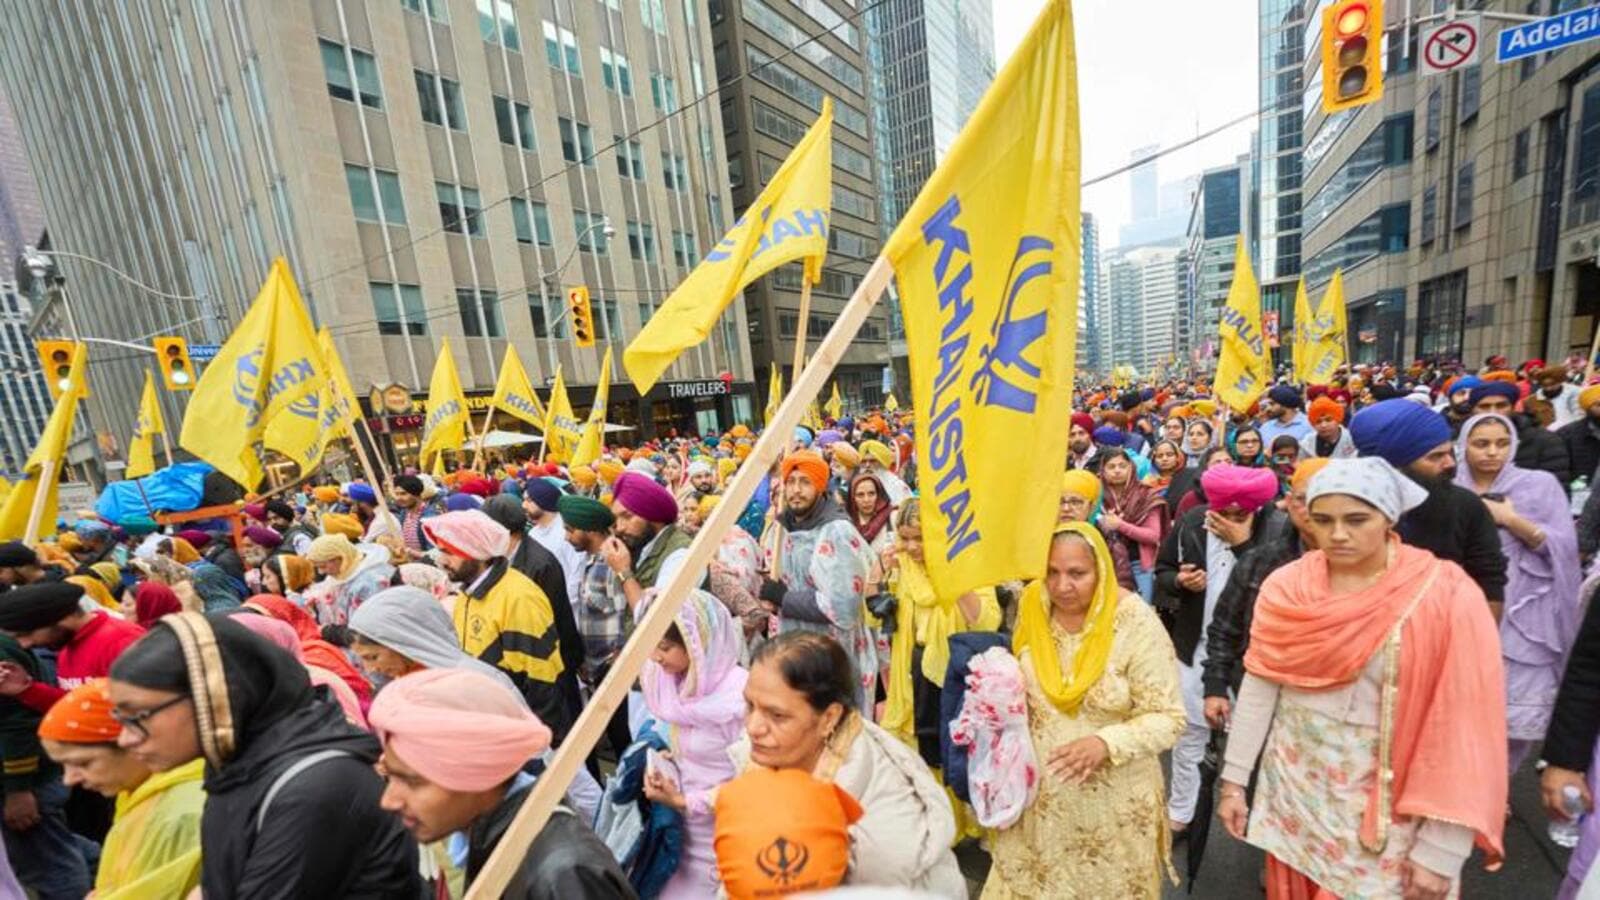 Canada: Sikhs for Justice plans to hold Khalistan referendum on July 28